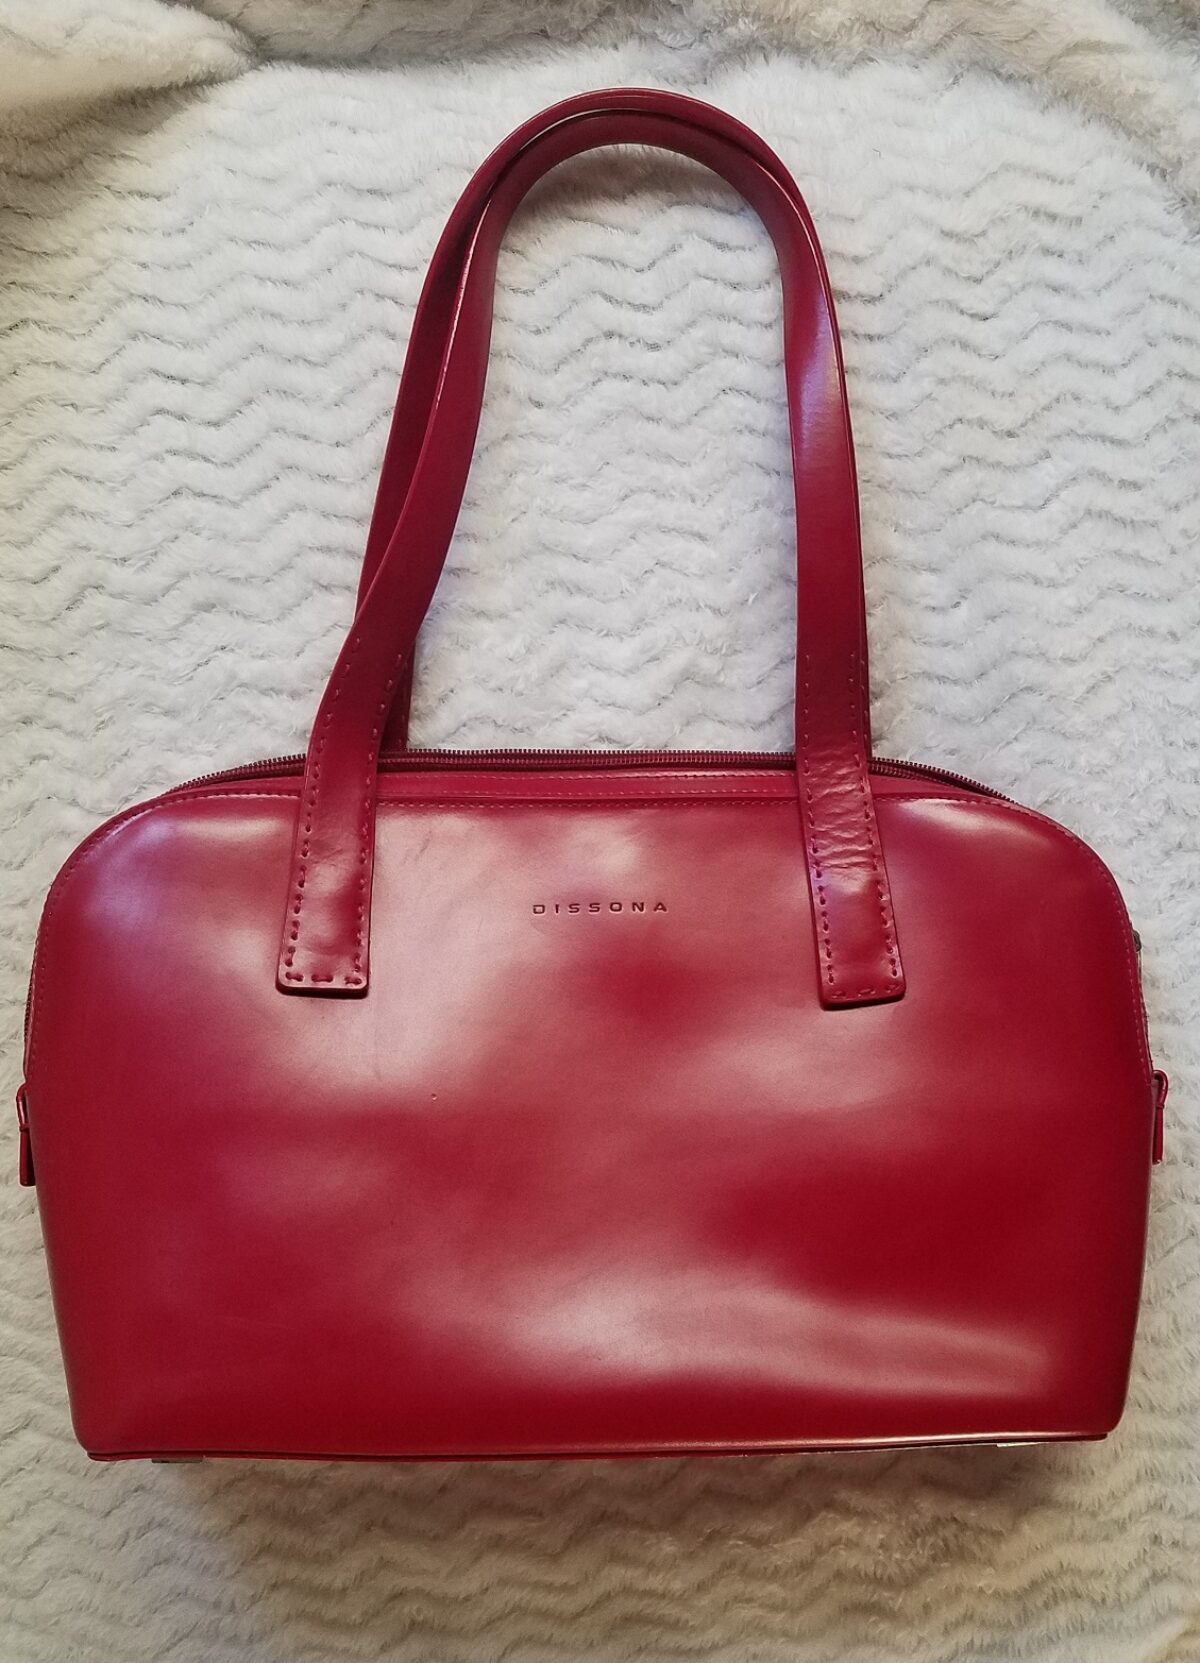 DISSONA ITALY RED Reptile Stamped Leather LARGE Bag Purse Double Handle  Handbag